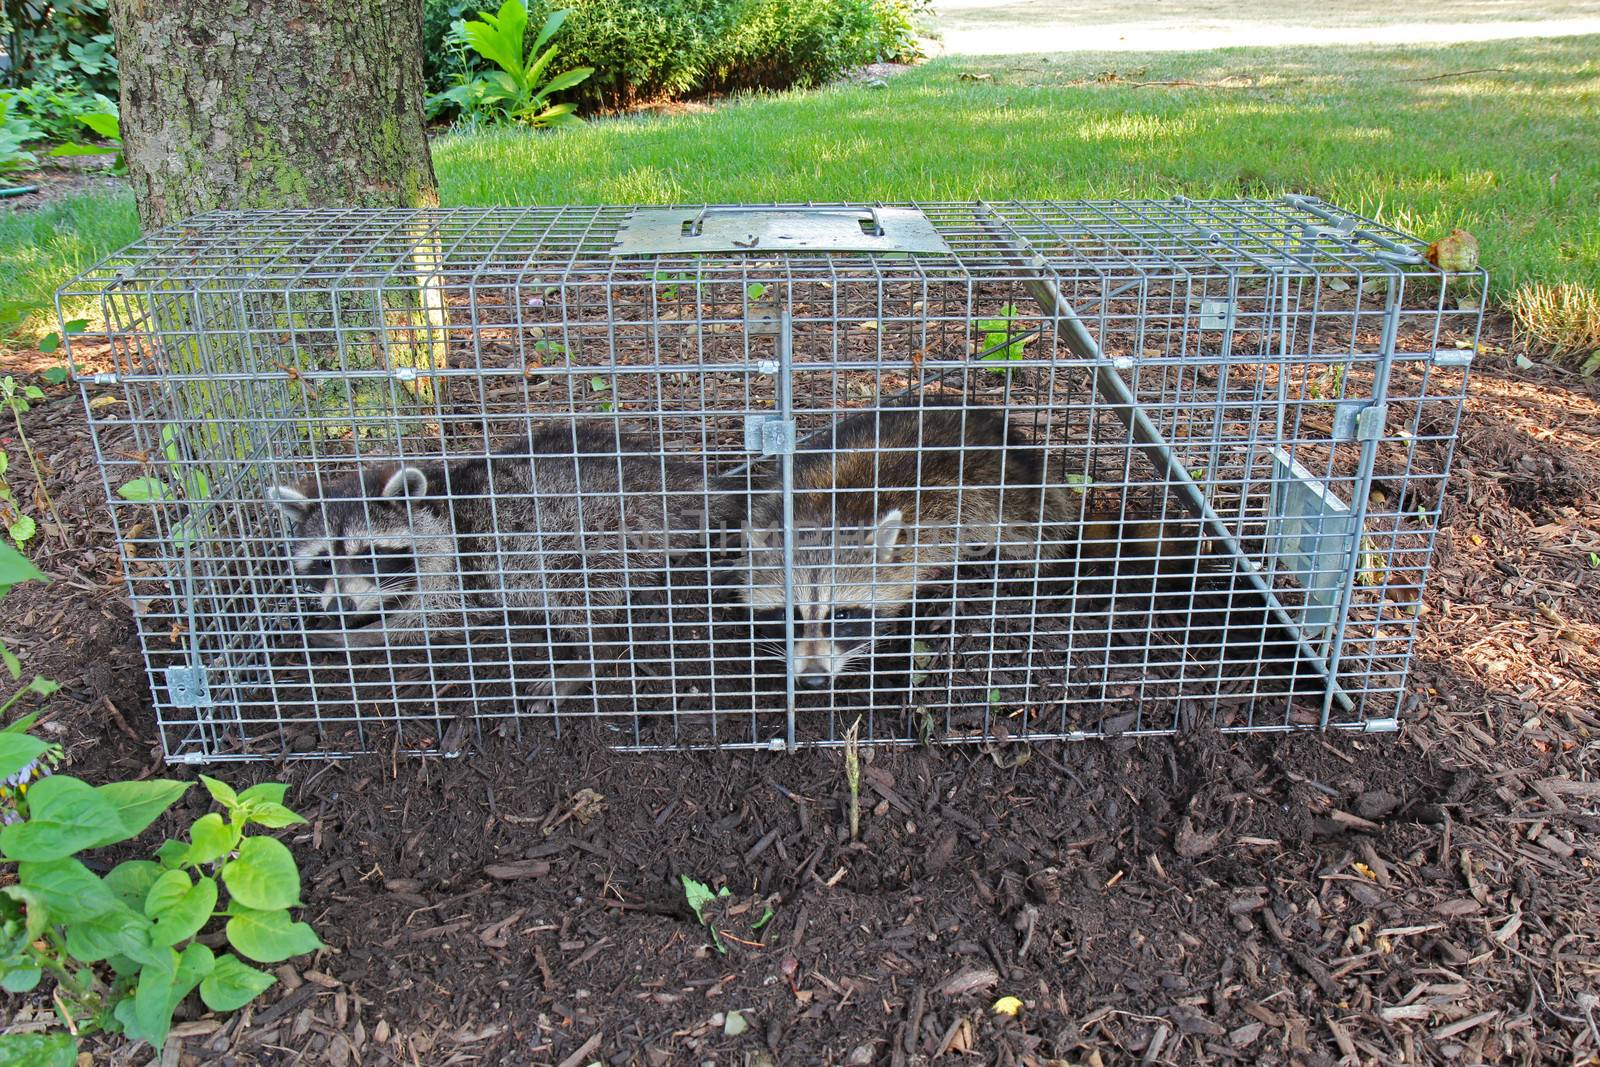 Two raccoons (Procyon lotor) caught in a live trap by sgoodwin4813